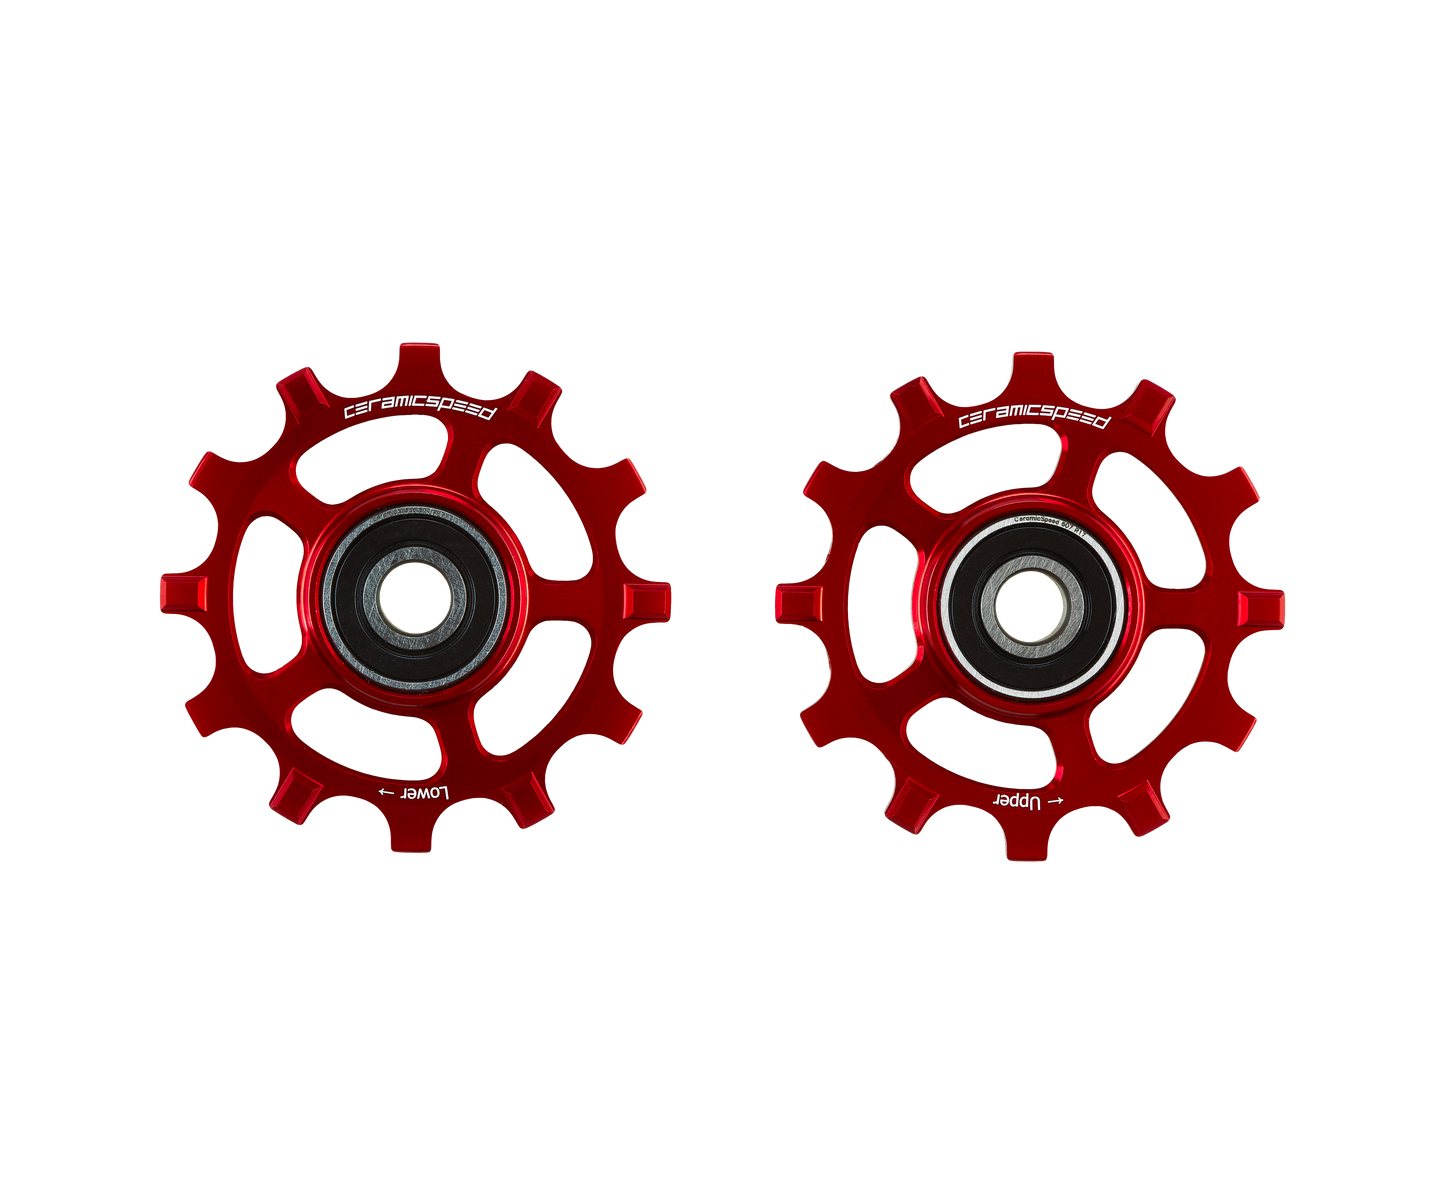 Coated Alloy Pulley Wheels for SRAM AXS Road, 12s NW